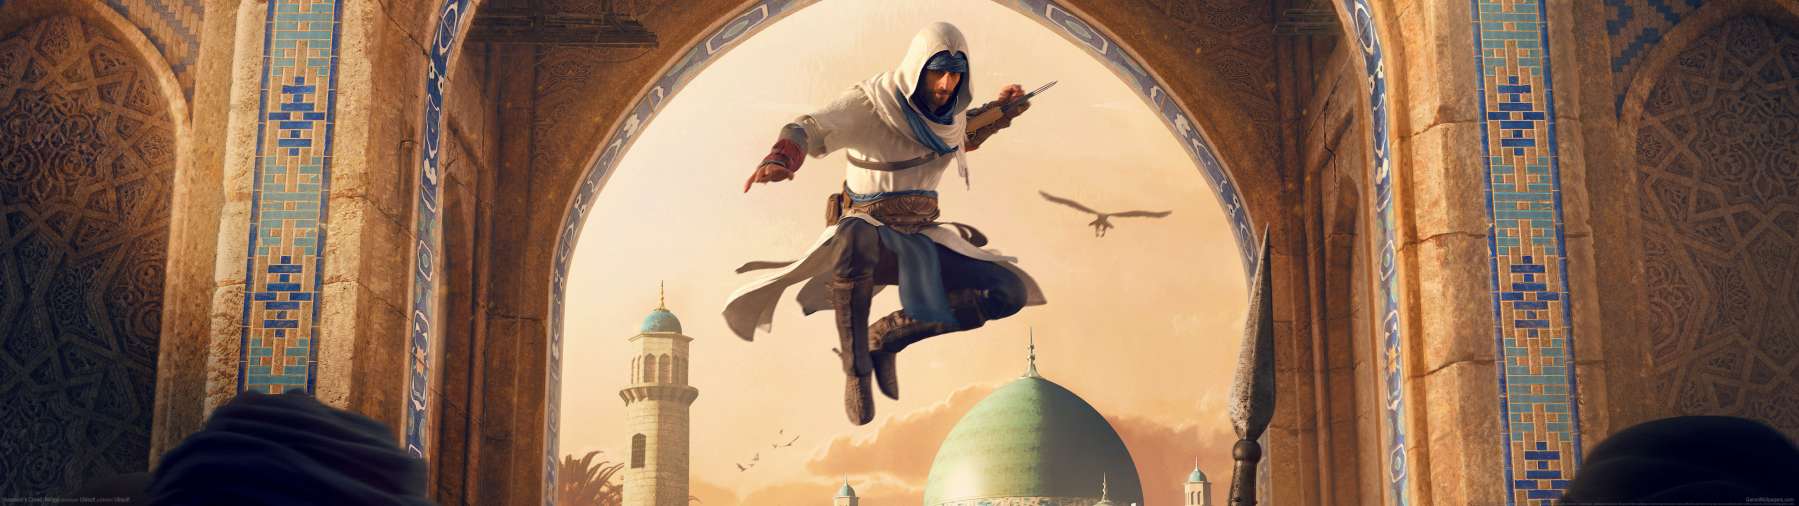 Assassin's Creed: Mirage superwide fond d'cran 01